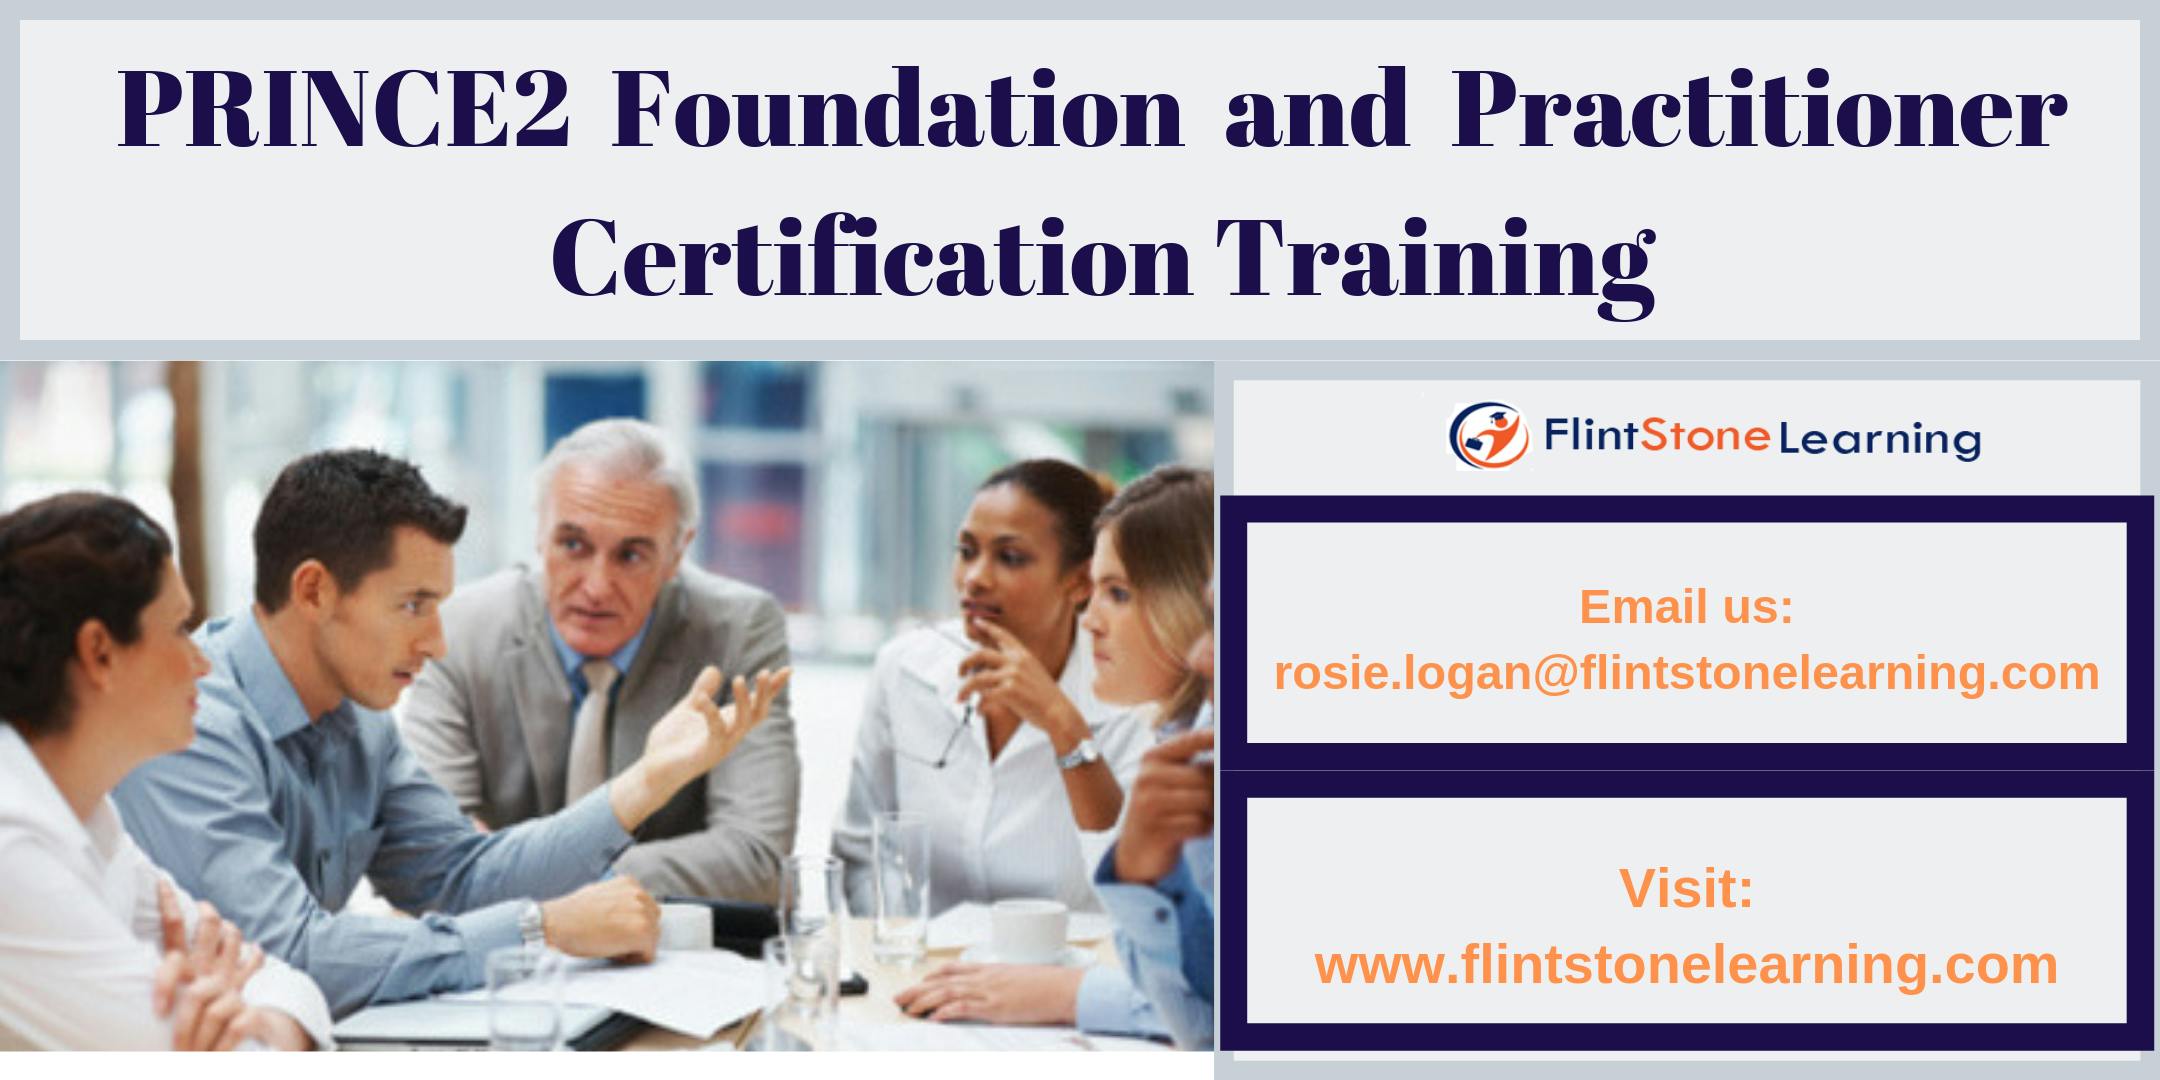 PRINCE2 Foundation and Practitioner Certification Training in Surry Hills,NSW